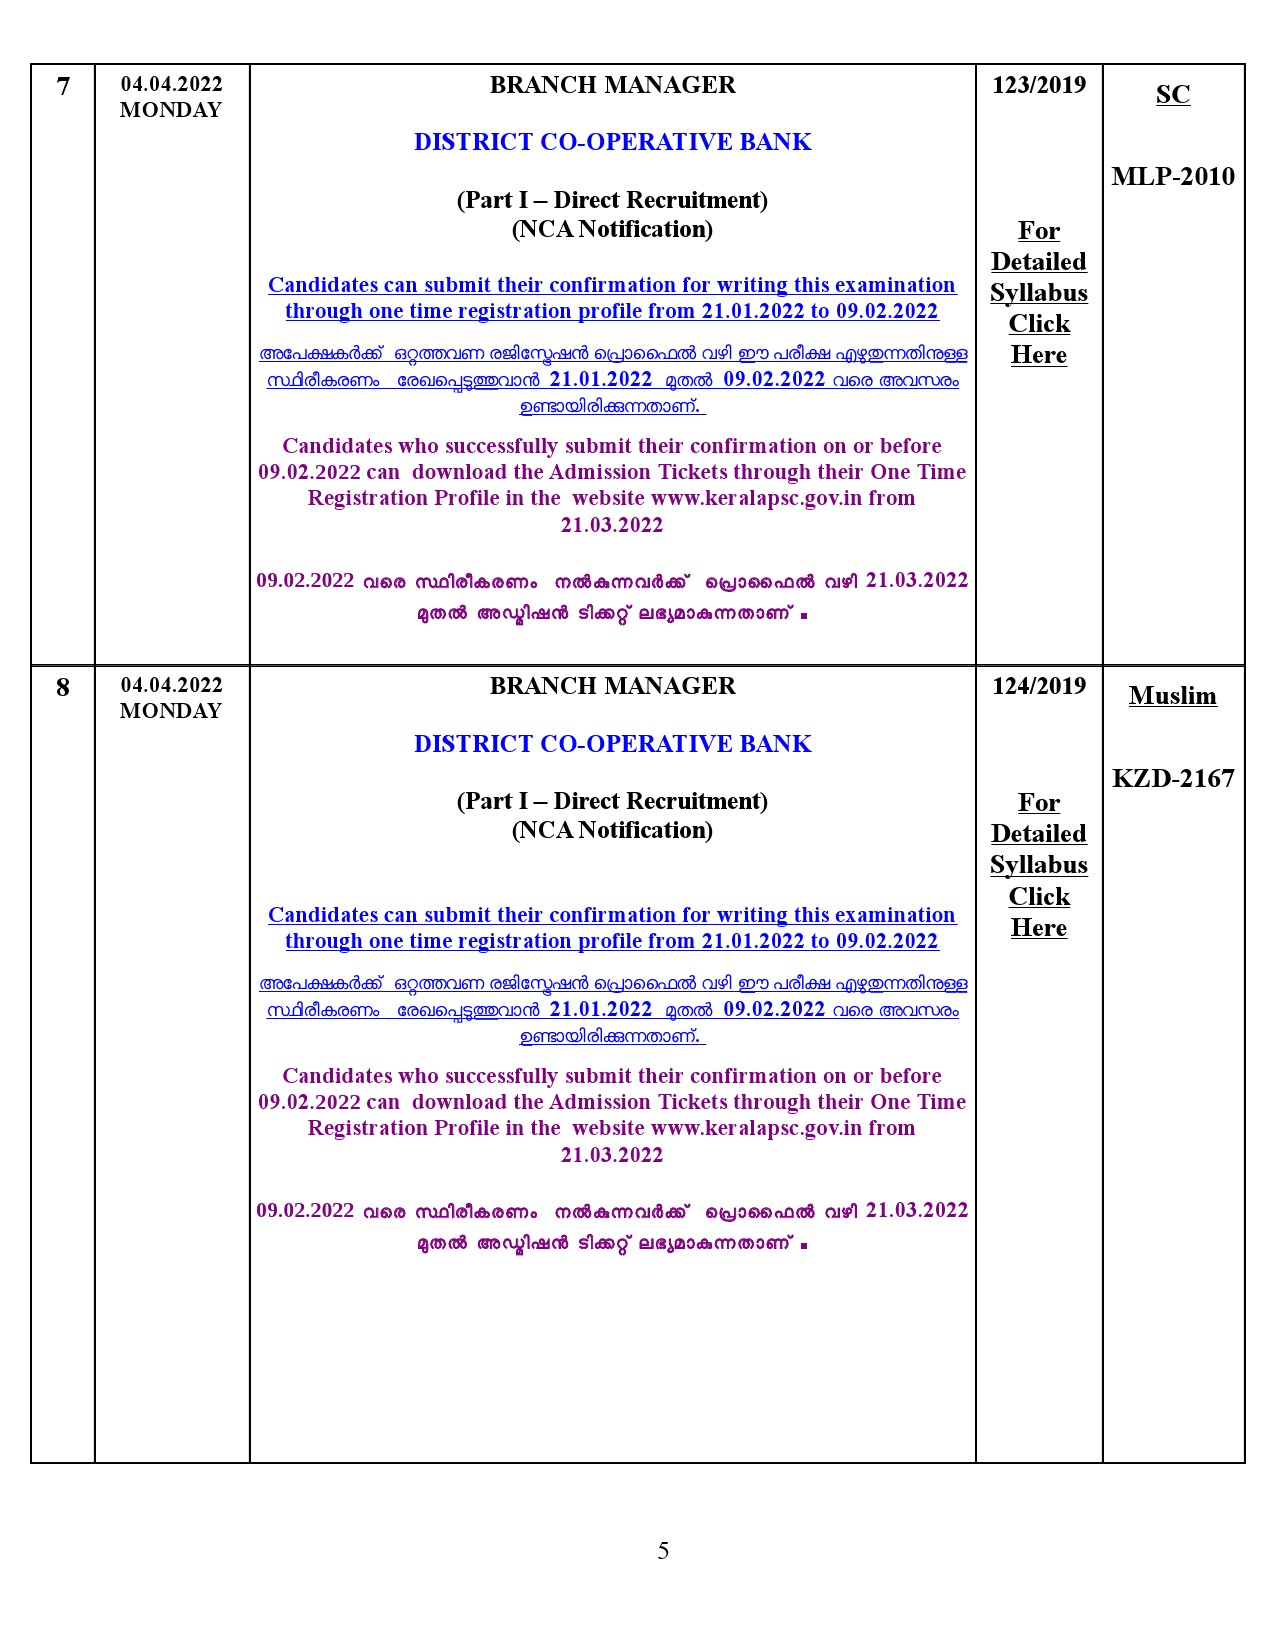 Examination Programme For The Month Of April 2022 - Notification Image 5